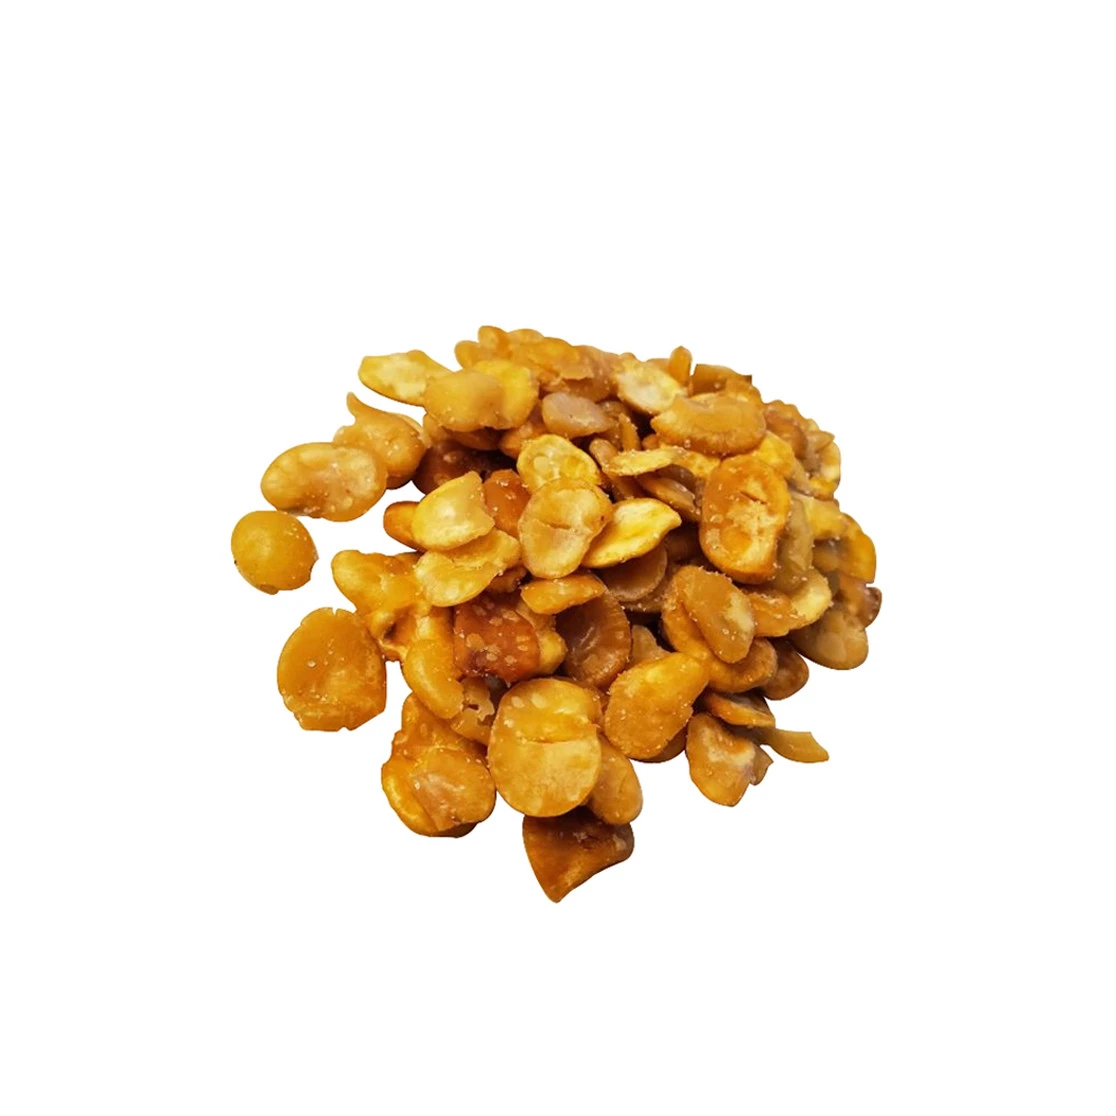 Typical fresh oil roasted Fava Beans wholesale snack import spicy food